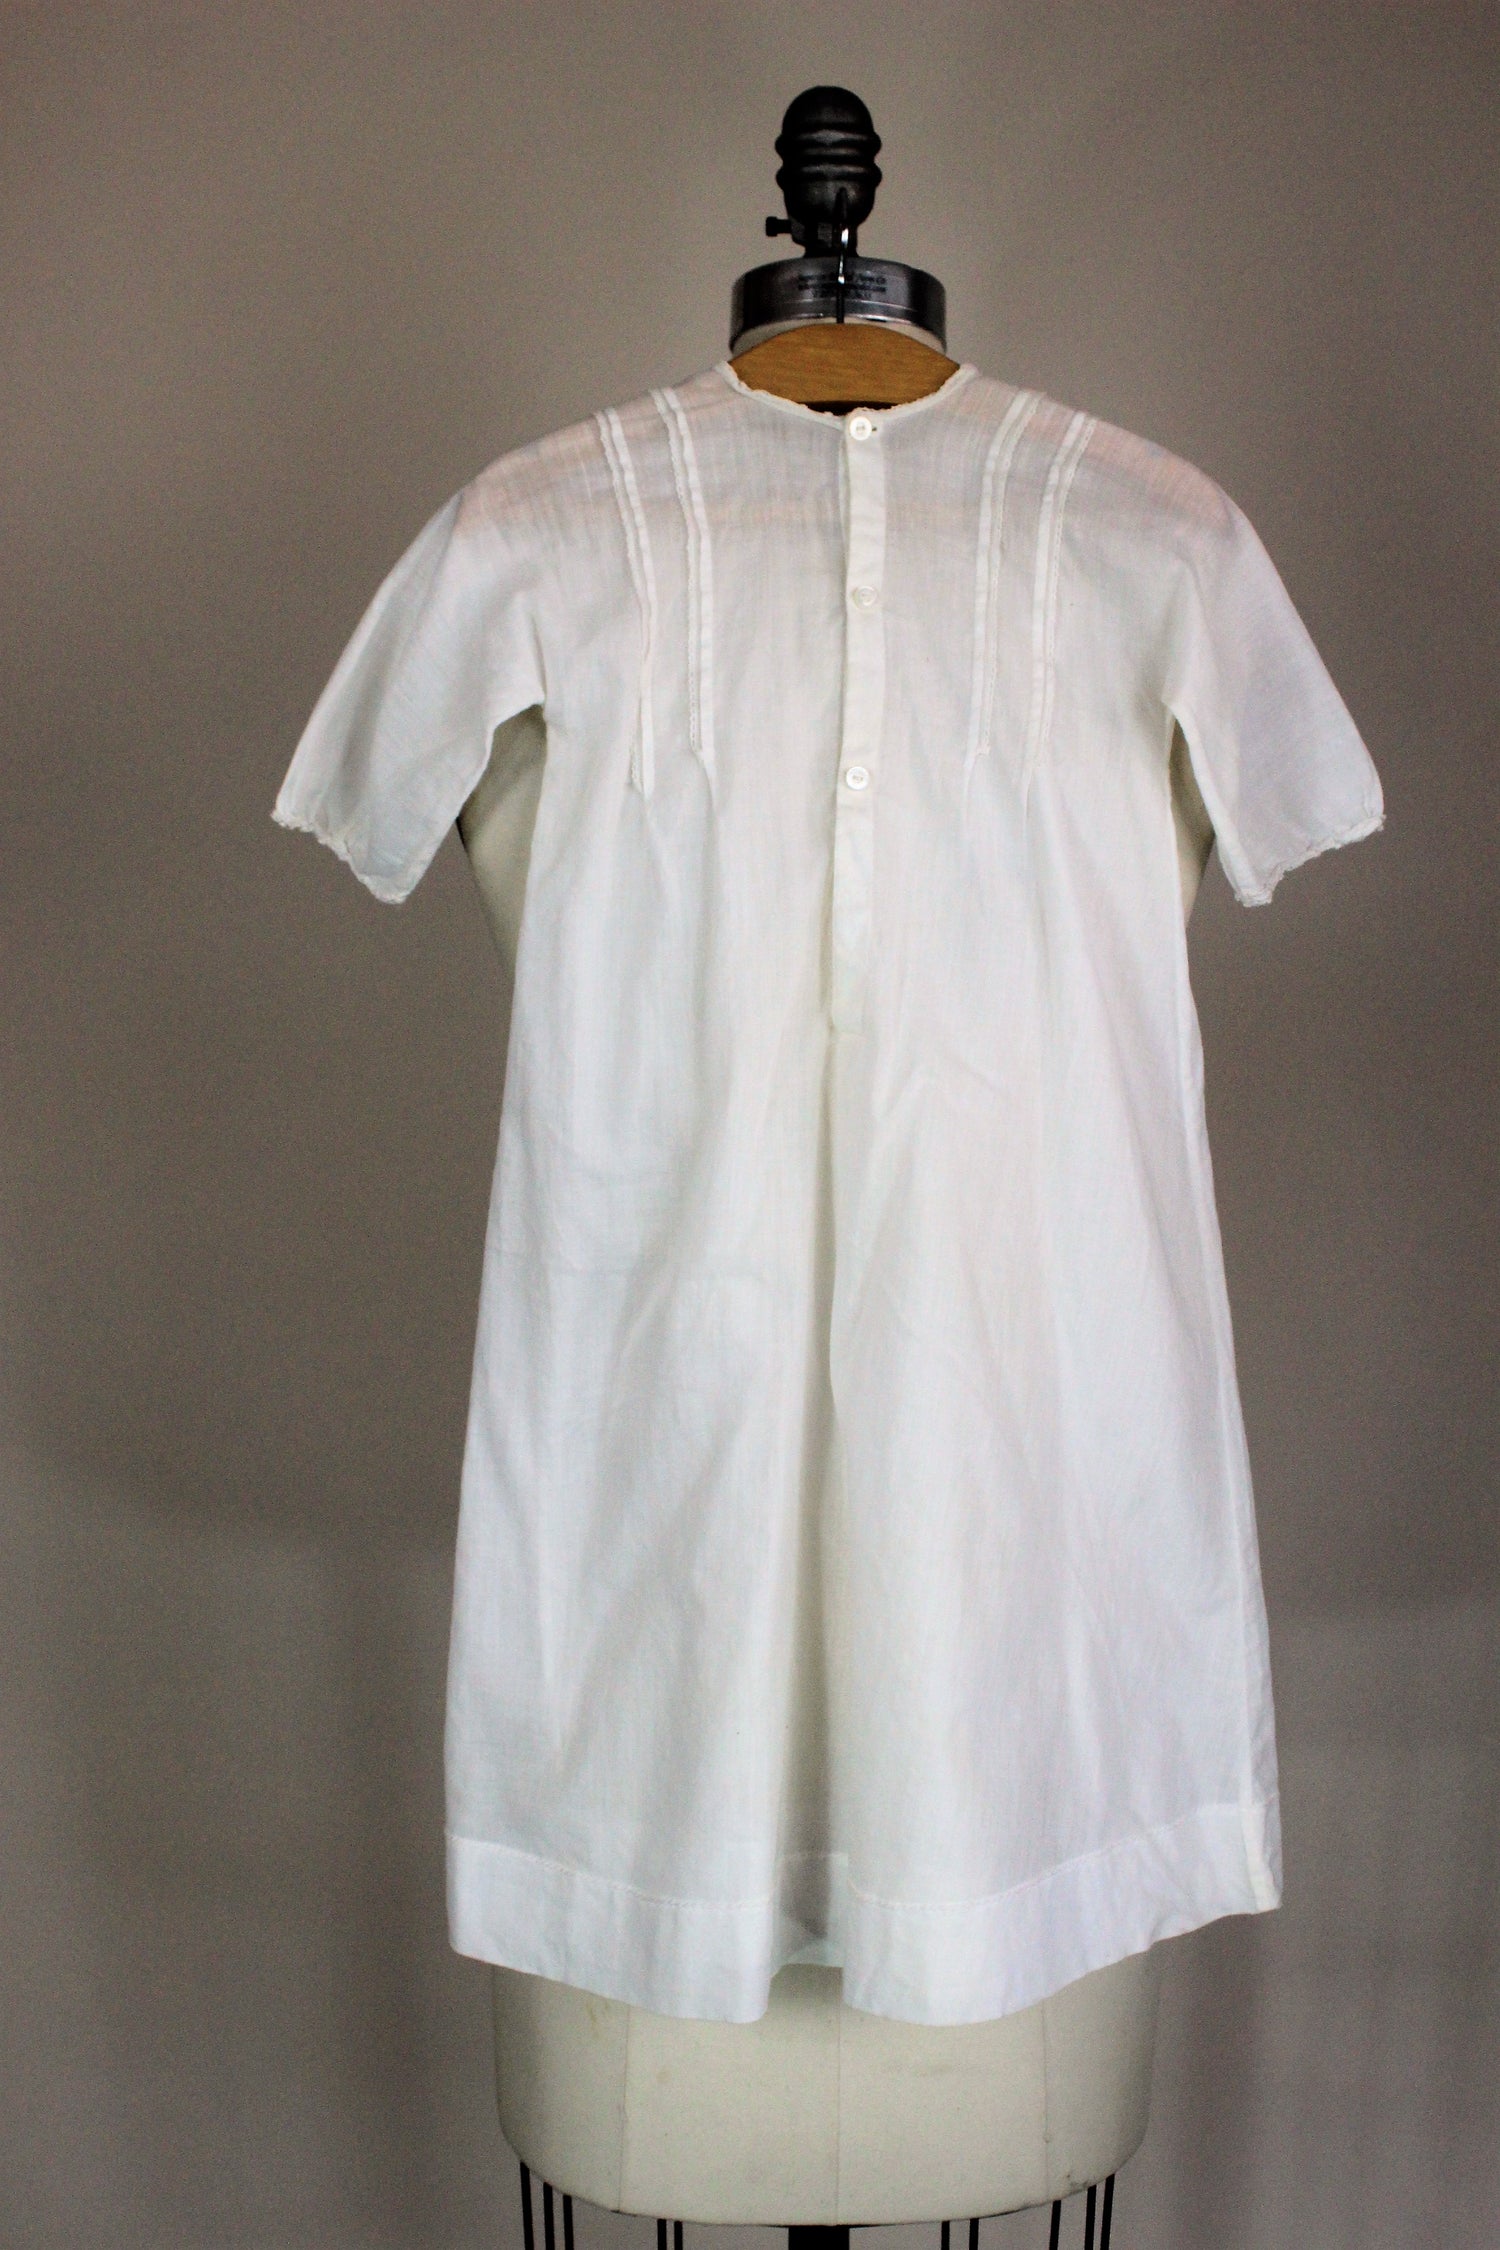 Vintage 1910s  White Cotton Baby Christening Gown